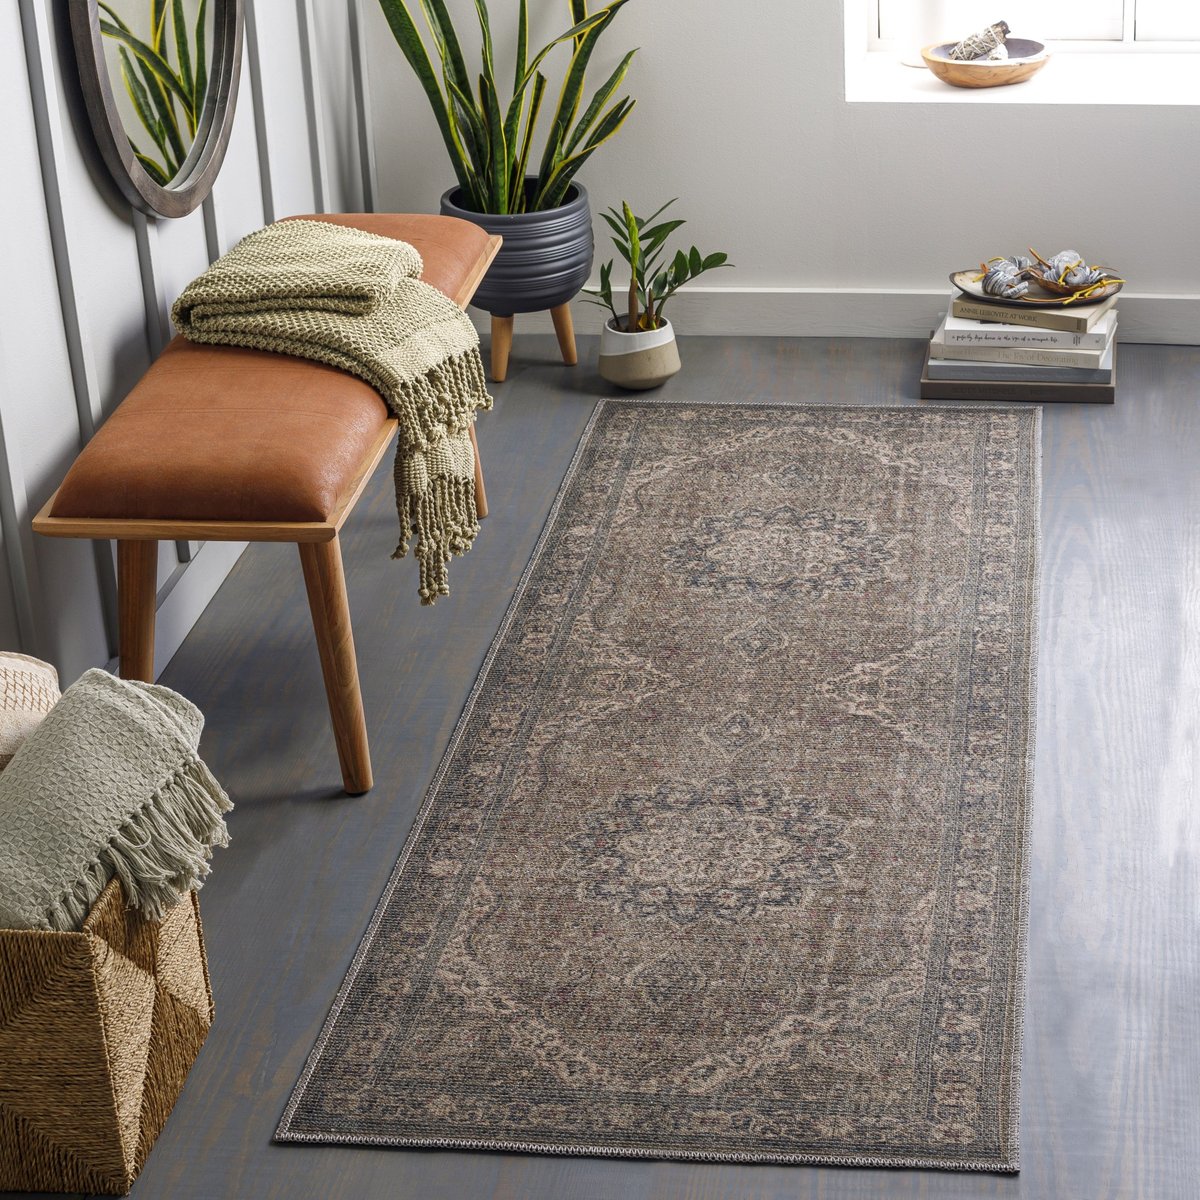 Throw rug Solid Rugs at